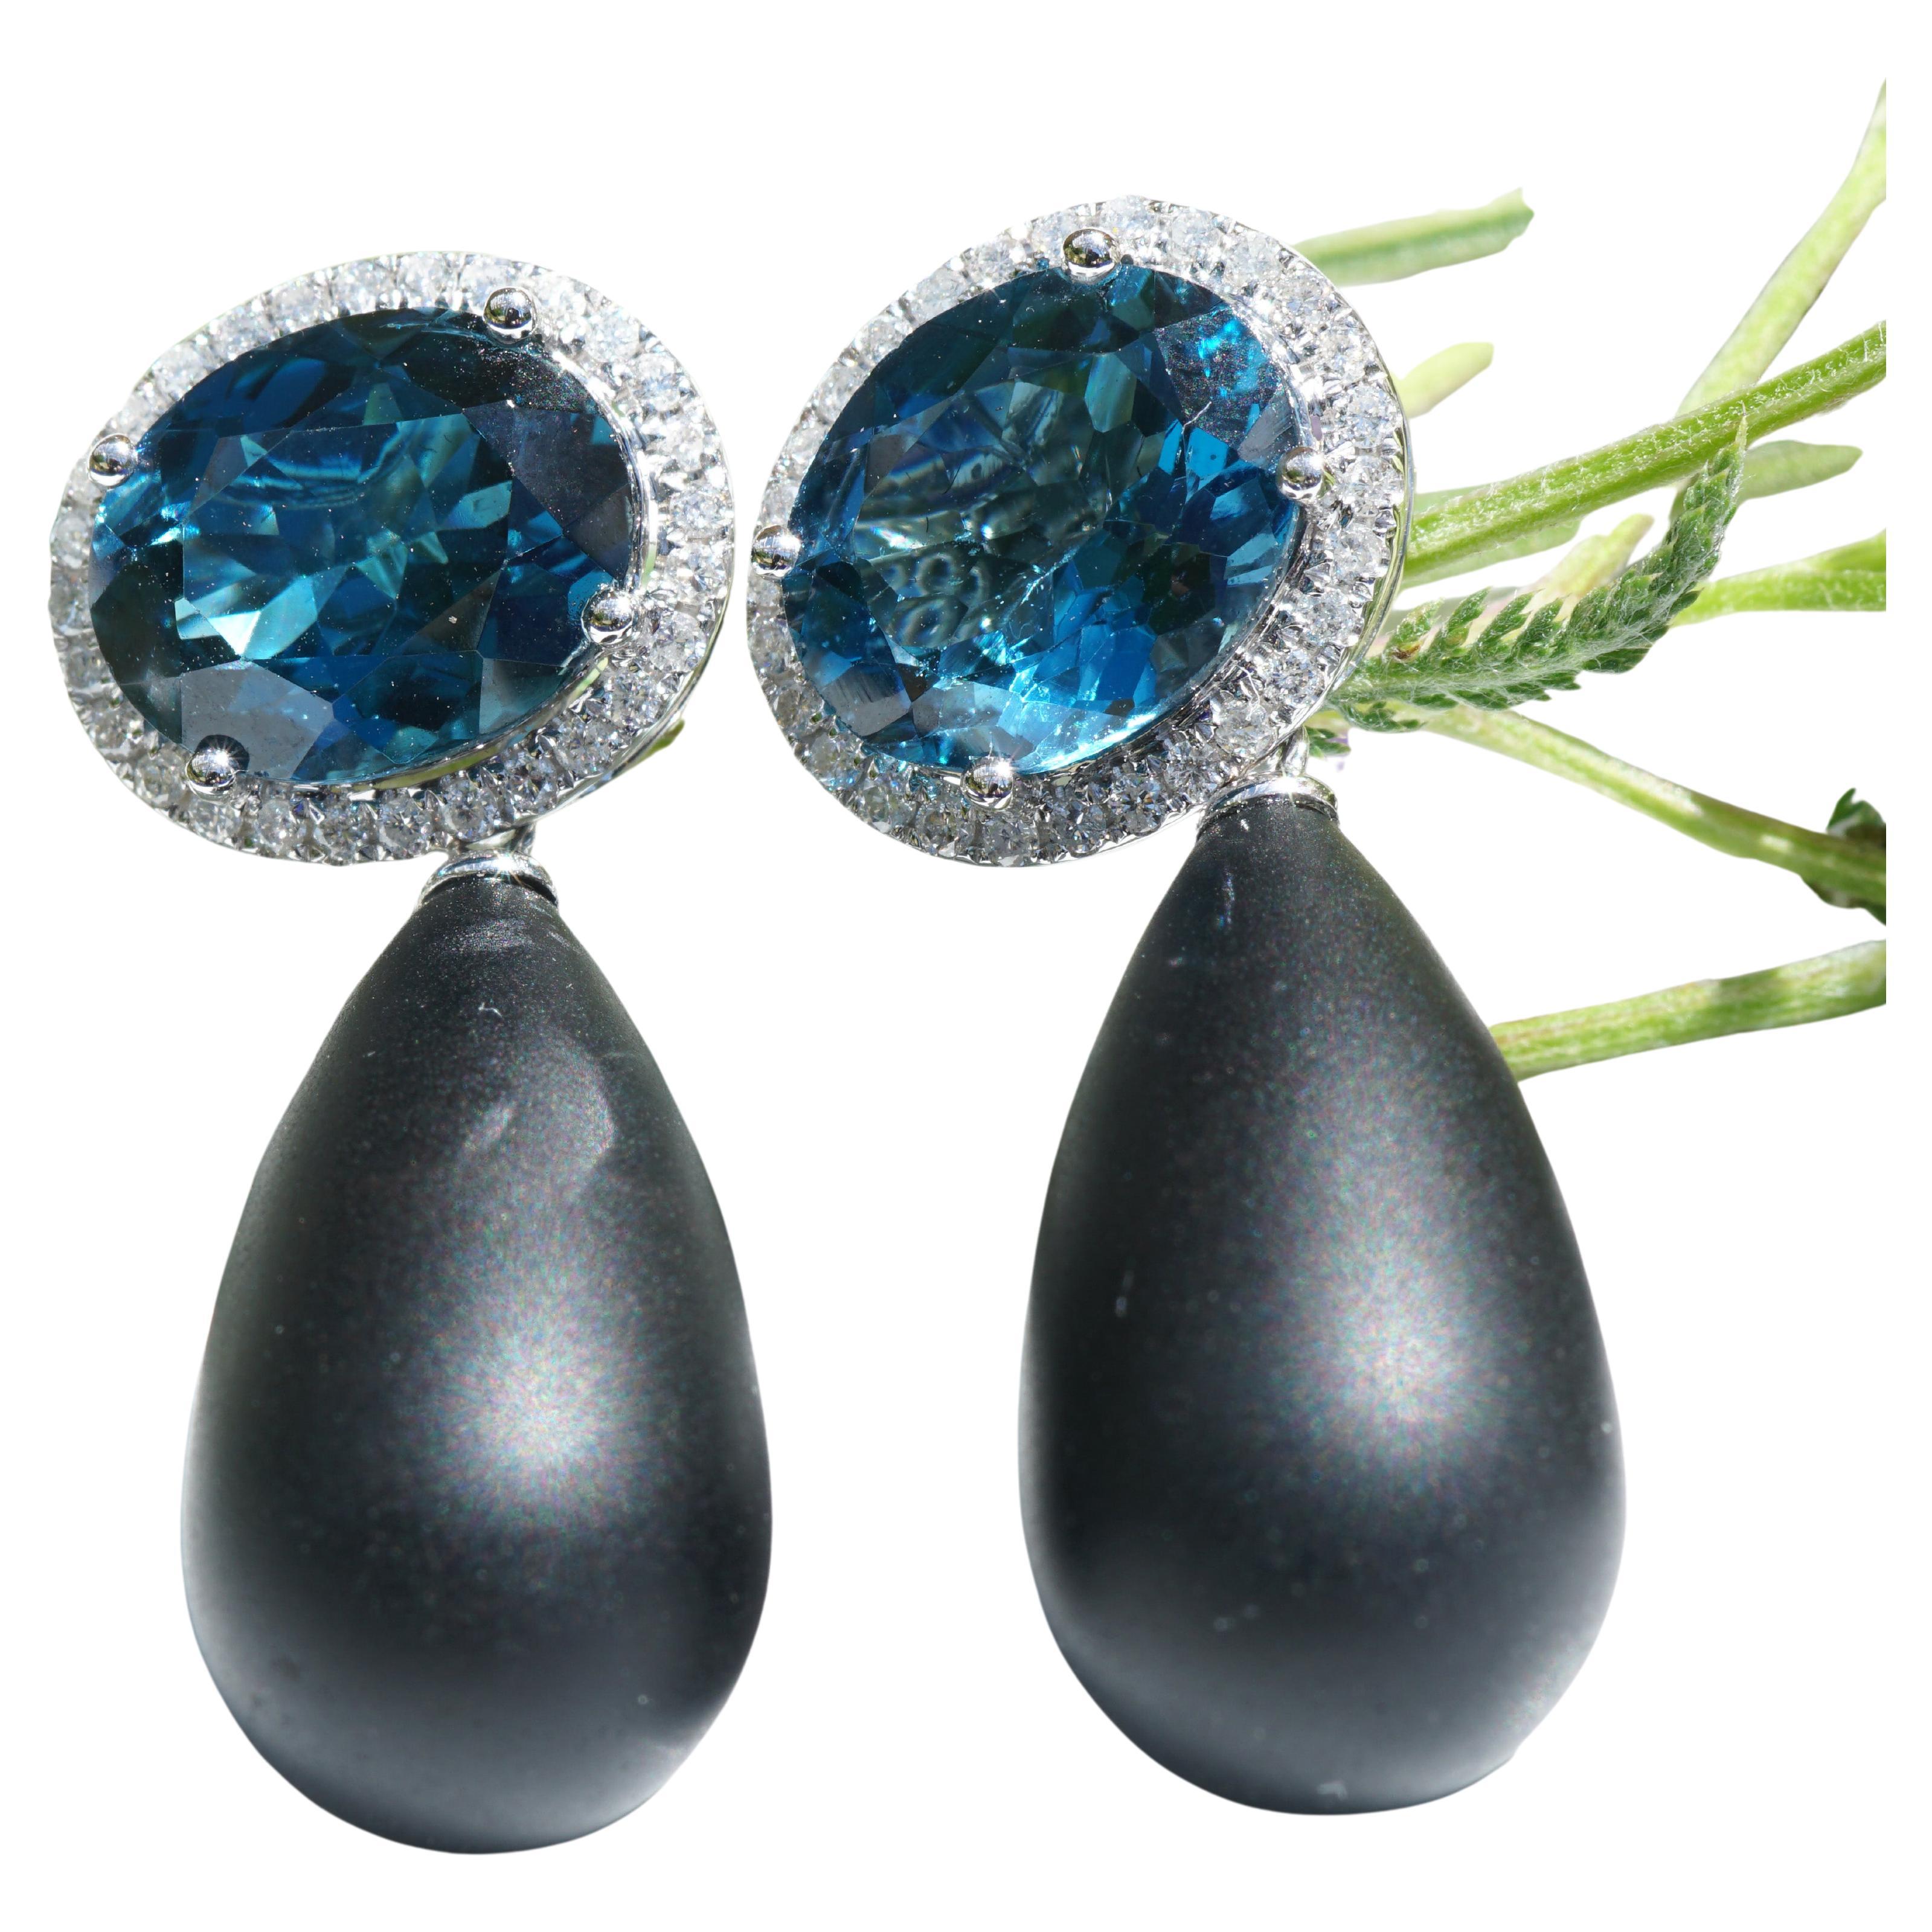 Drama Queen, very special opulent earrings, earrings with unusual gemstones, here onyx drops and two blue topazes in the color Londen Blue (treated) total approx. 10.62 ct, full cut brilliants total approx. 0.52 ct, W (white) / SI-P (small-distinct